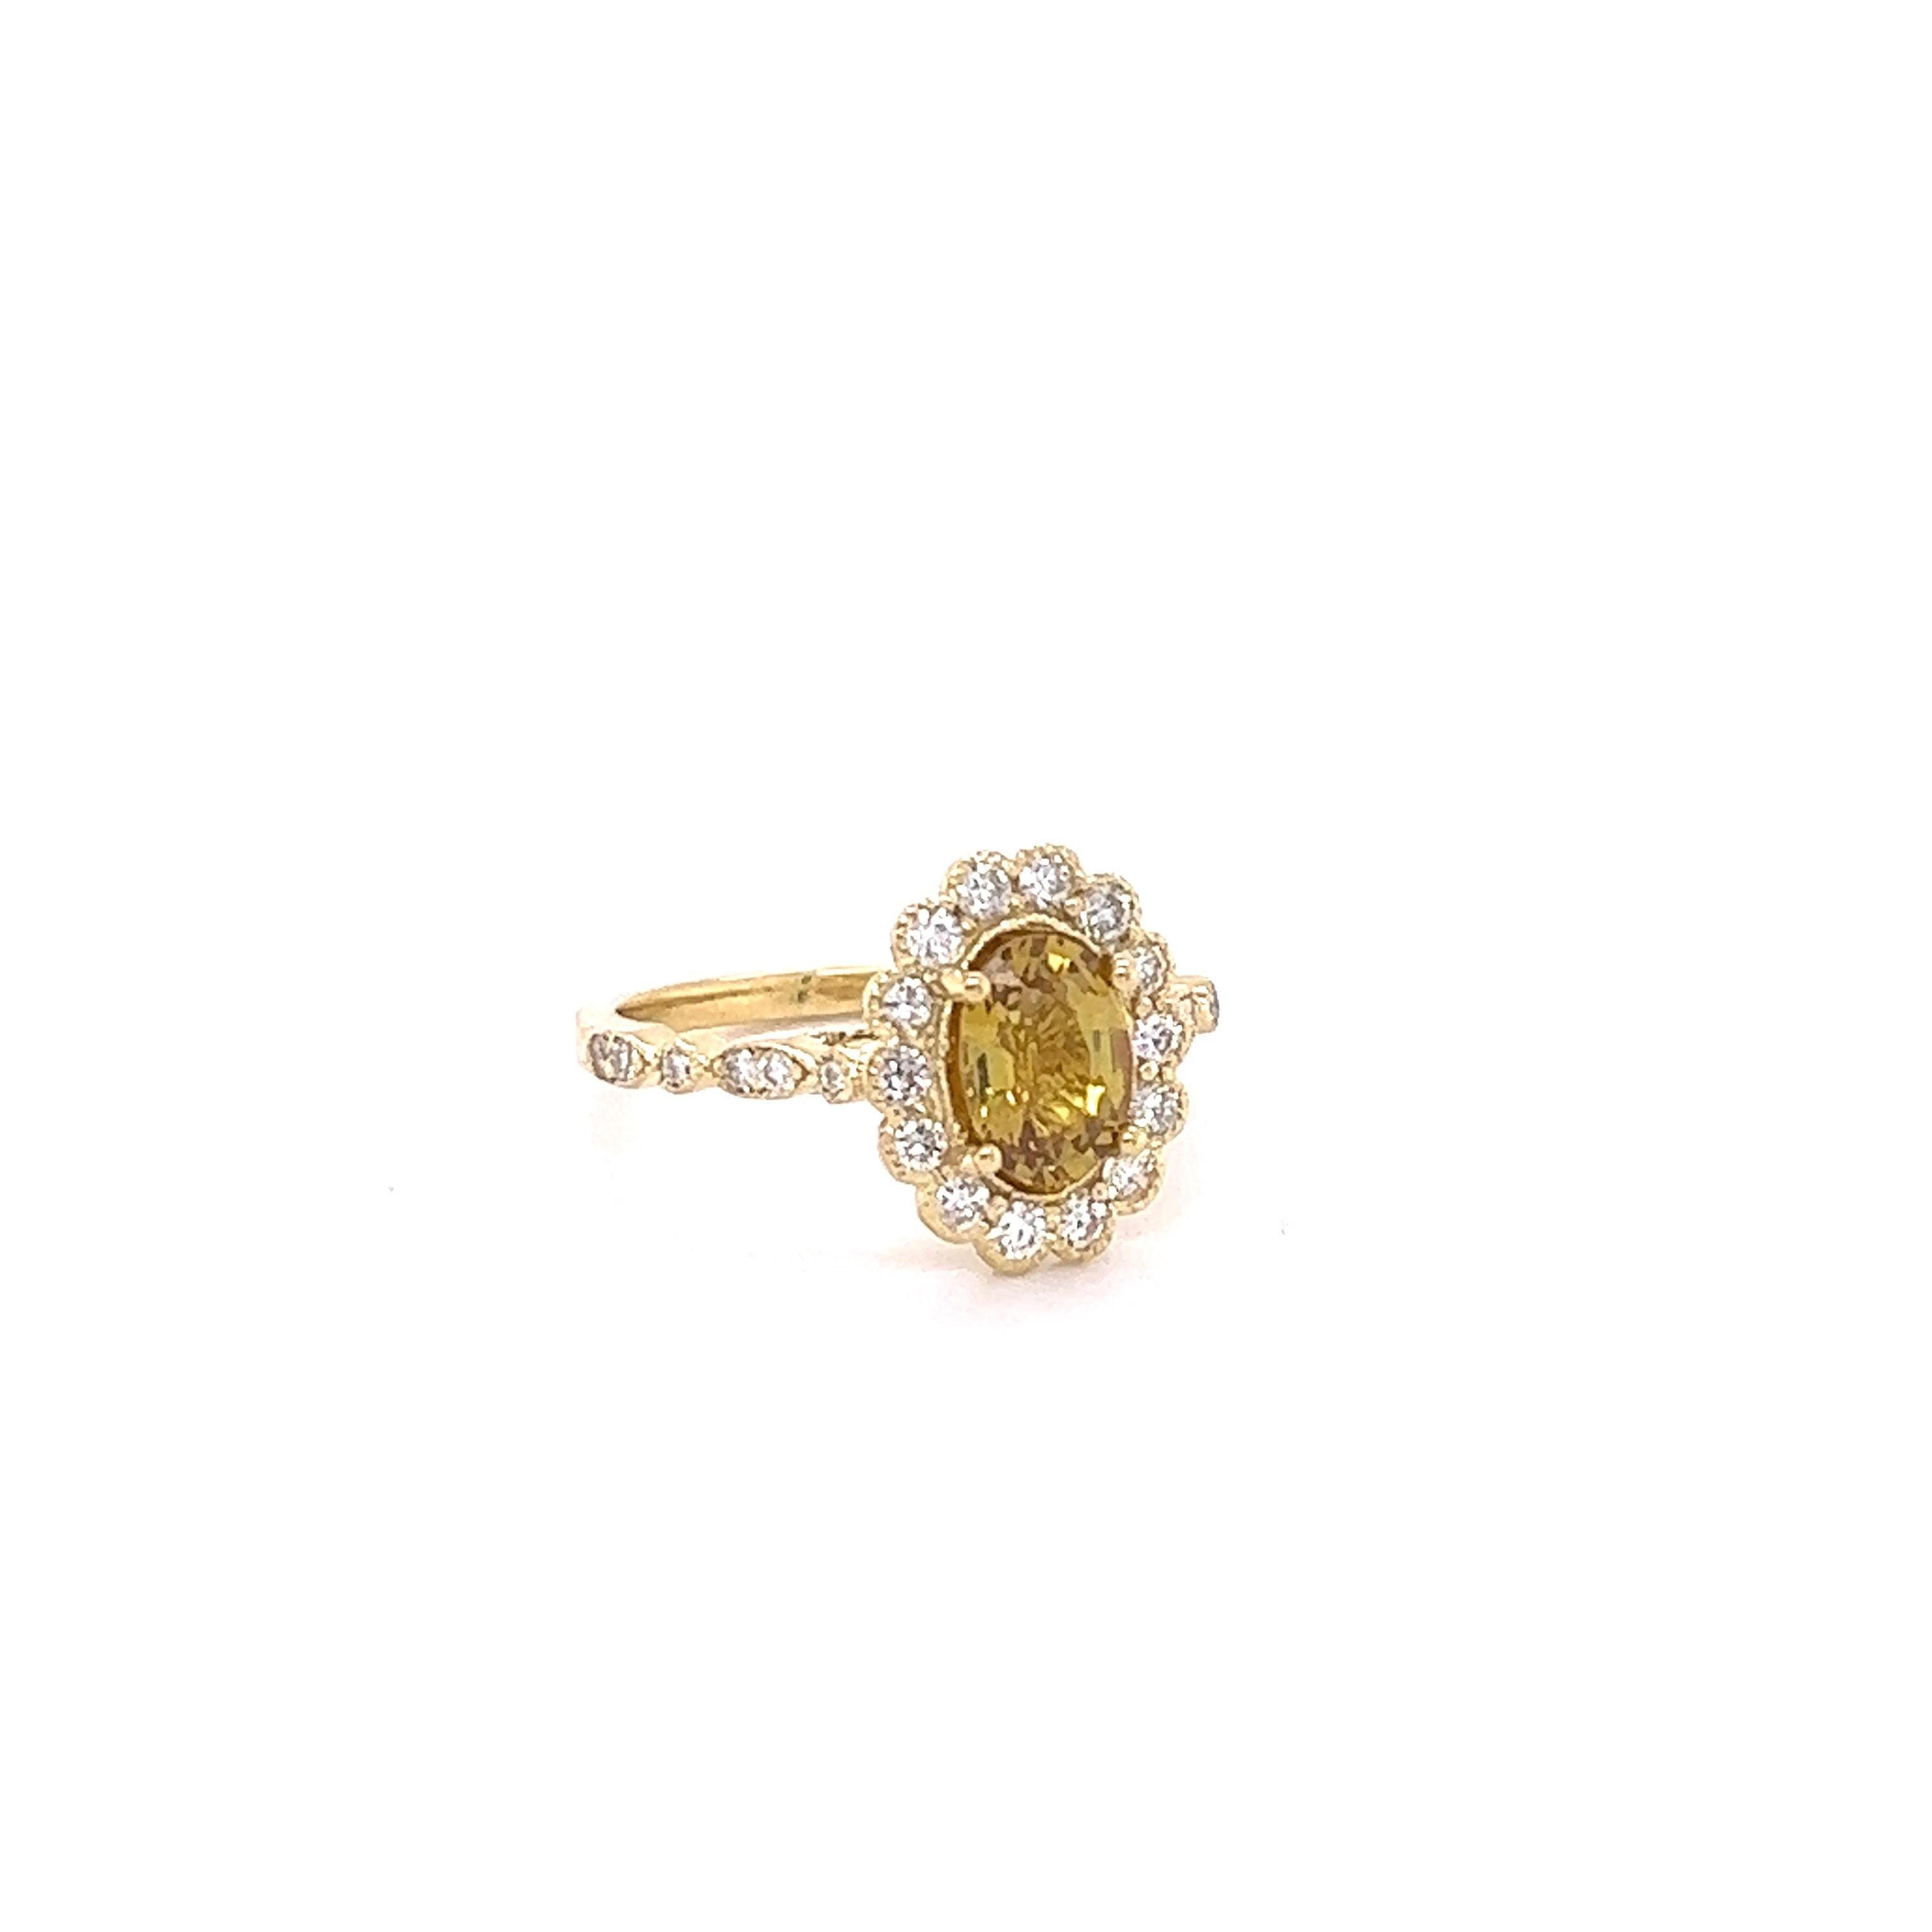 This beautiful ring has a Natural Oval Cut Yellow Sapphire with No Heat that weights 1.36 Carats. 

The ring is embellished with 26 Round Cut Diamonds that weigh 0.50 Carats with a clarity and color of VS/H. 
The total carat weight of the ring is